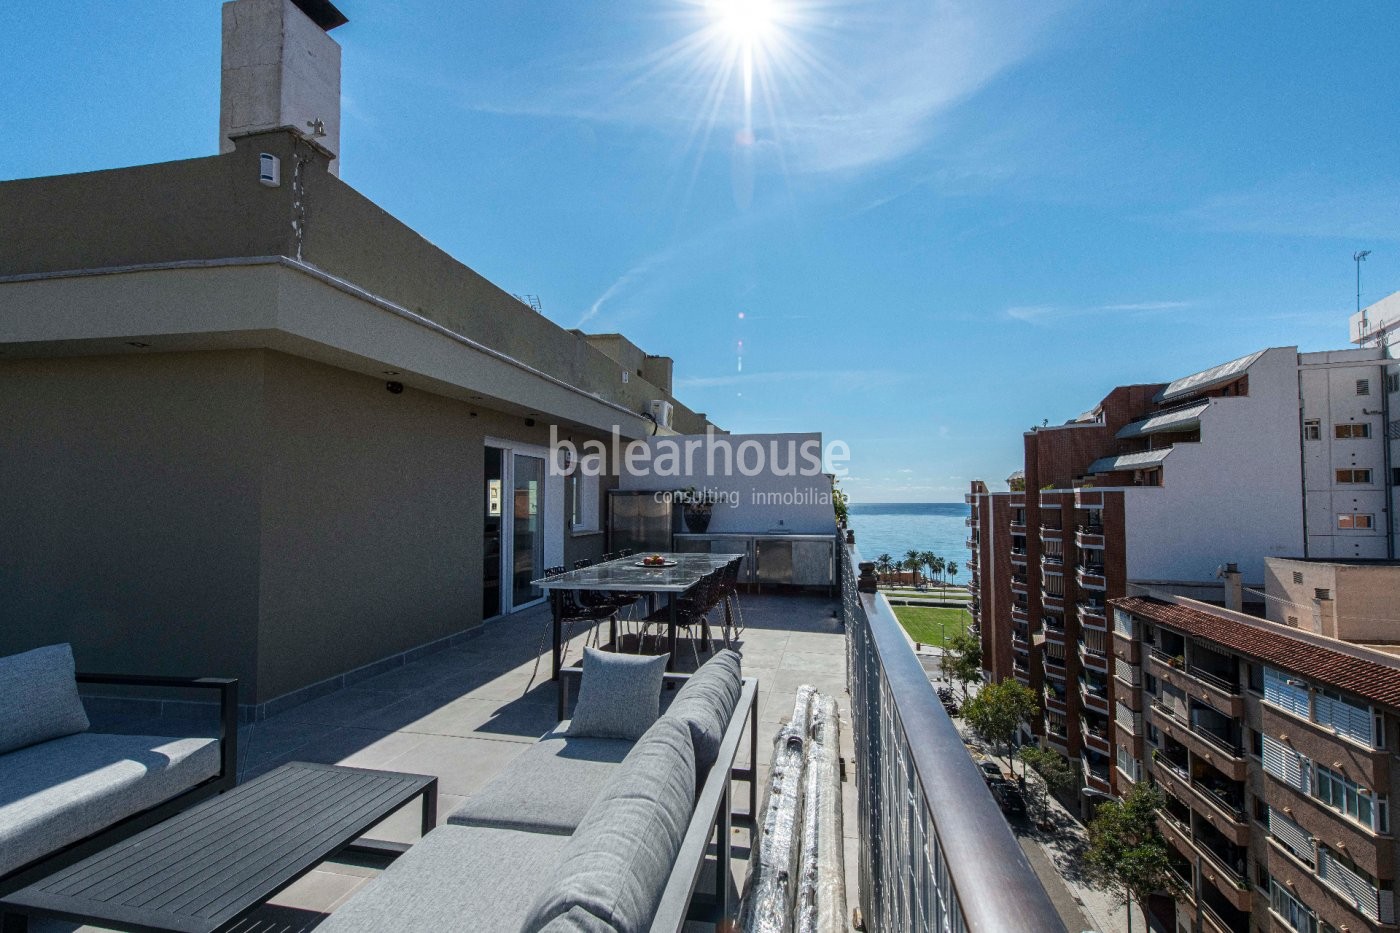 Spectacular refurbished penthouse with panoramic views next to the beach in Palma.